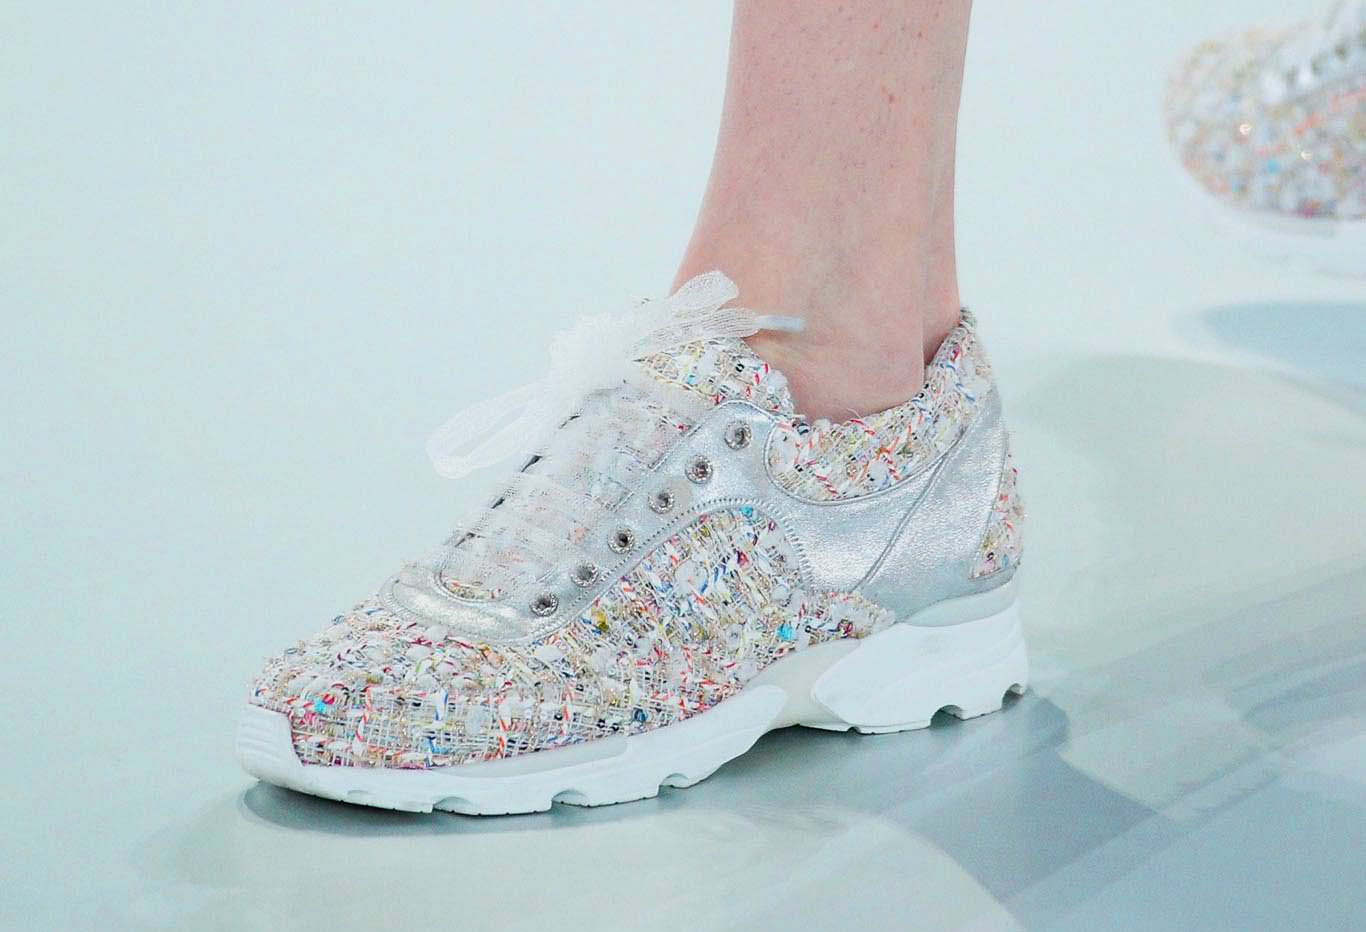 Trend Alert! Embellished Sneakers for Spring...and Prom? Rissy Roo's